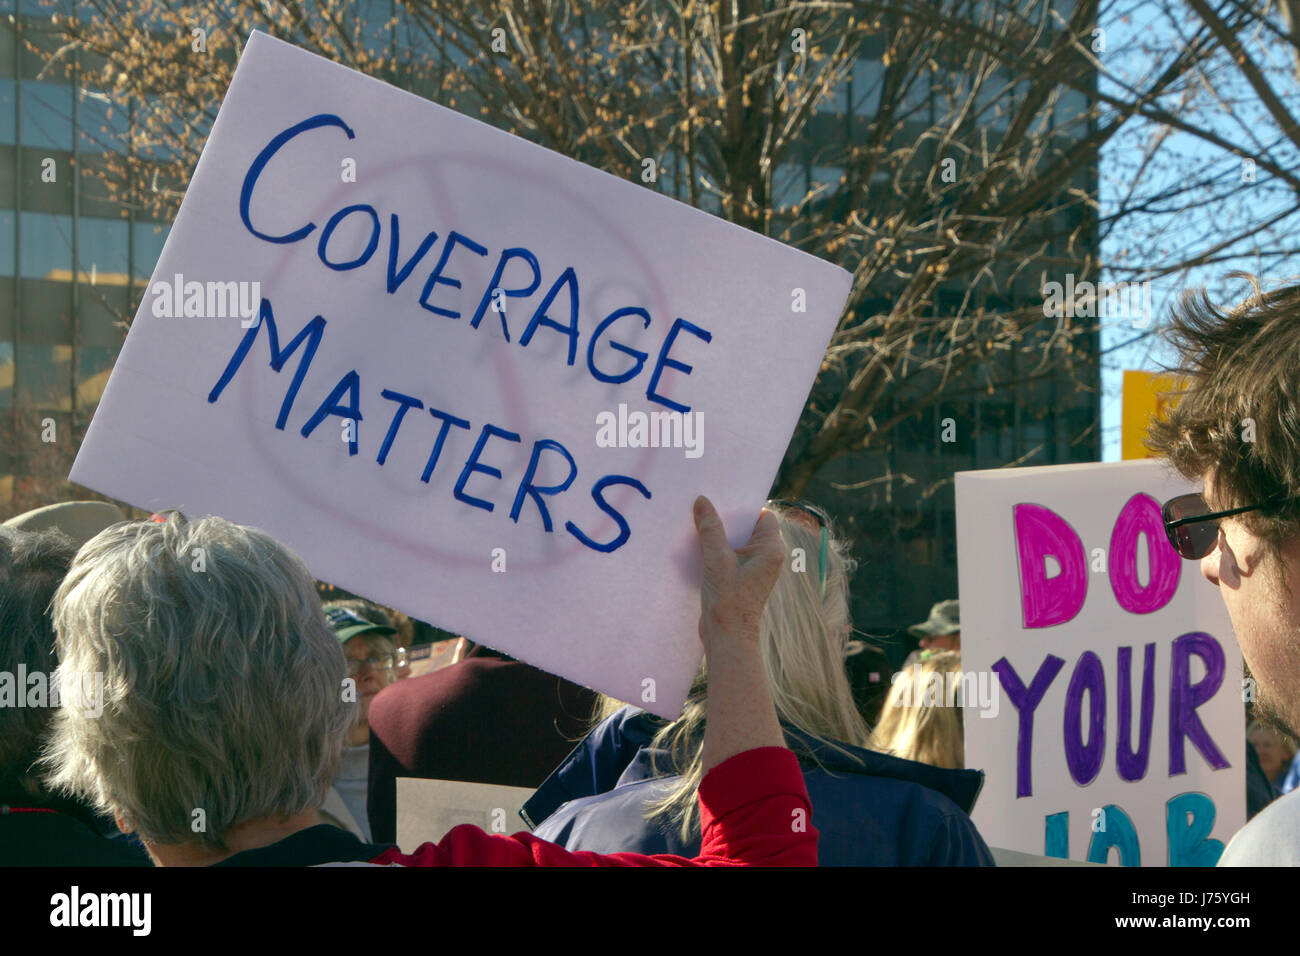 Asheville, North Carolina, USA - February 25, 2017:  Protesters hold signs at an Affordable Care Act rally saying that coverage matters as Republicans Stock Photo